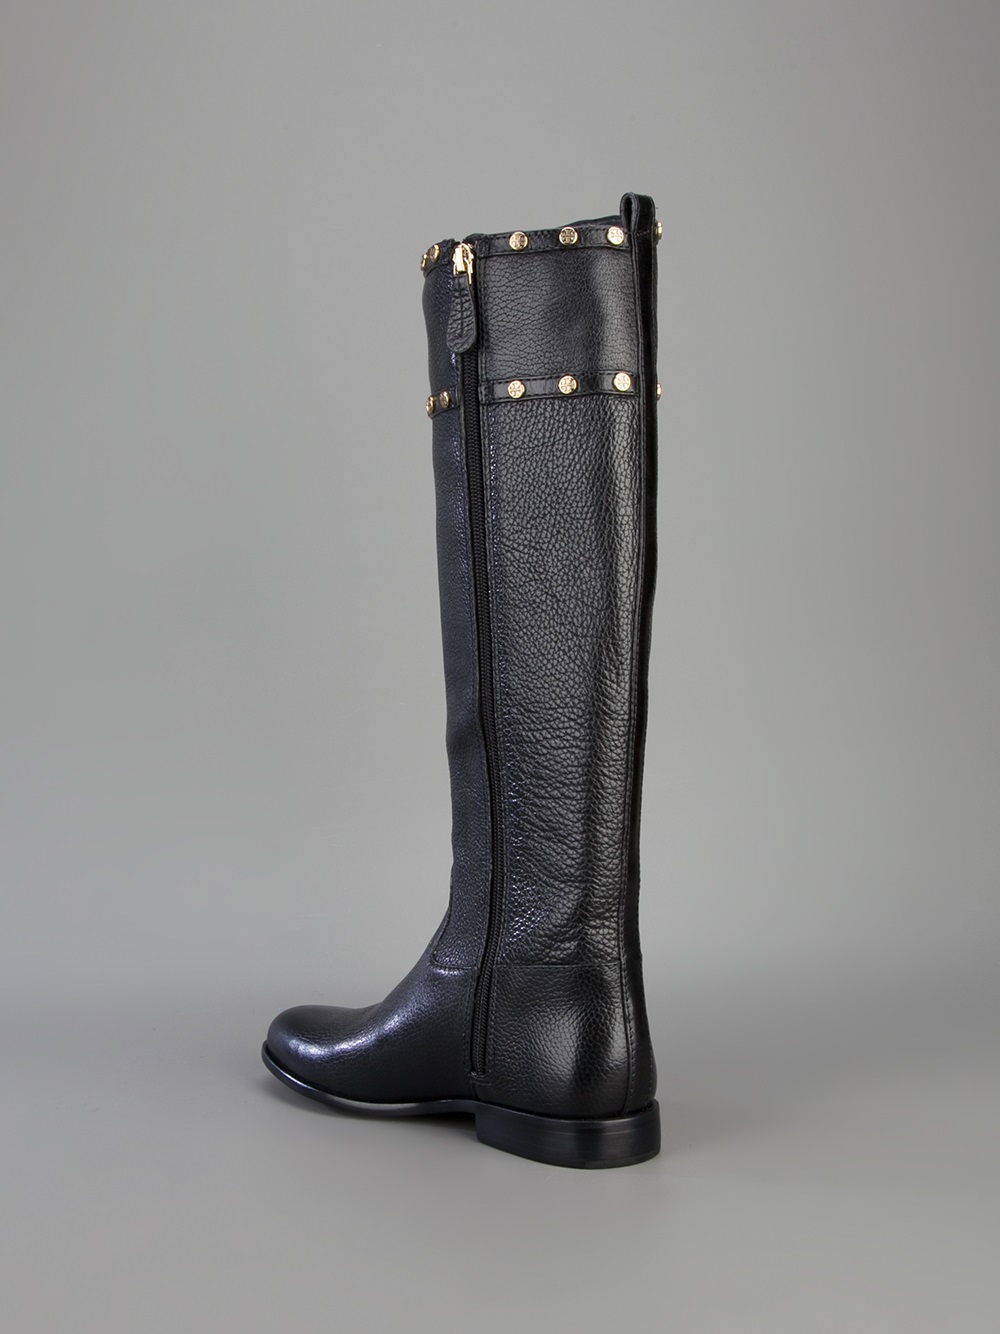 Tory Burch Studded Knee High Boot in Black - Lyst